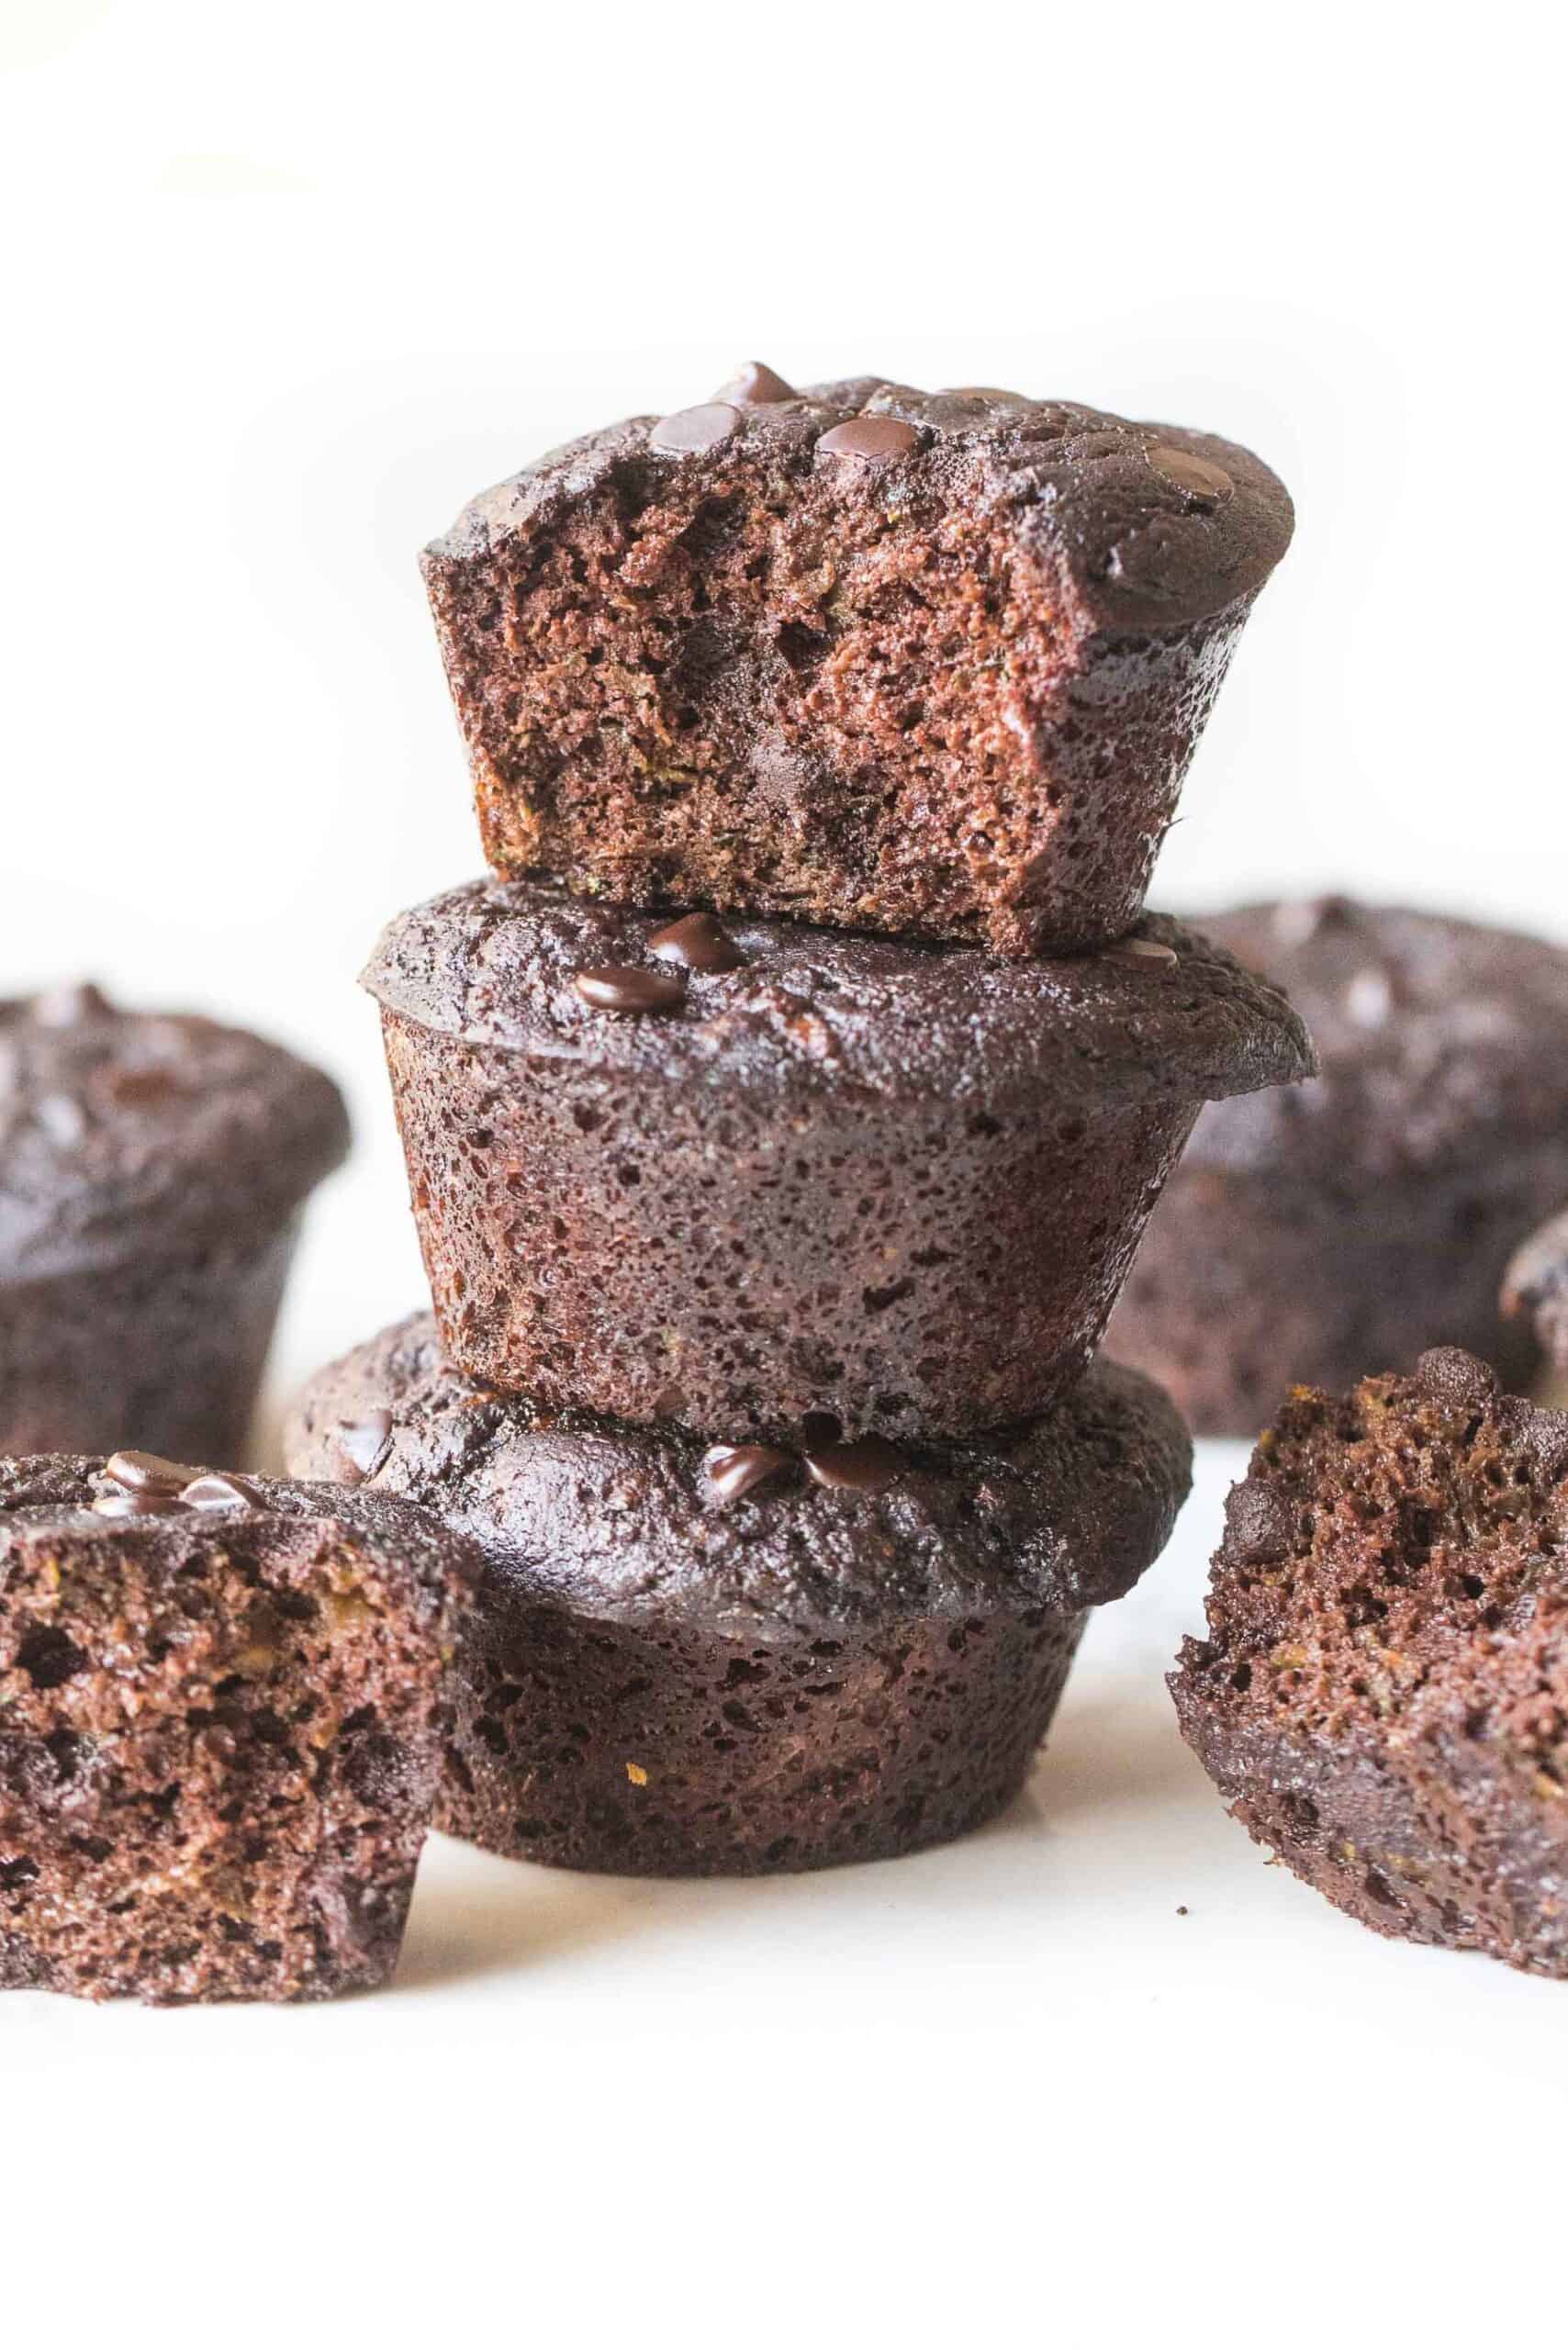 keto chocolate zucchini muffins stacked with a bite taken out on a white background